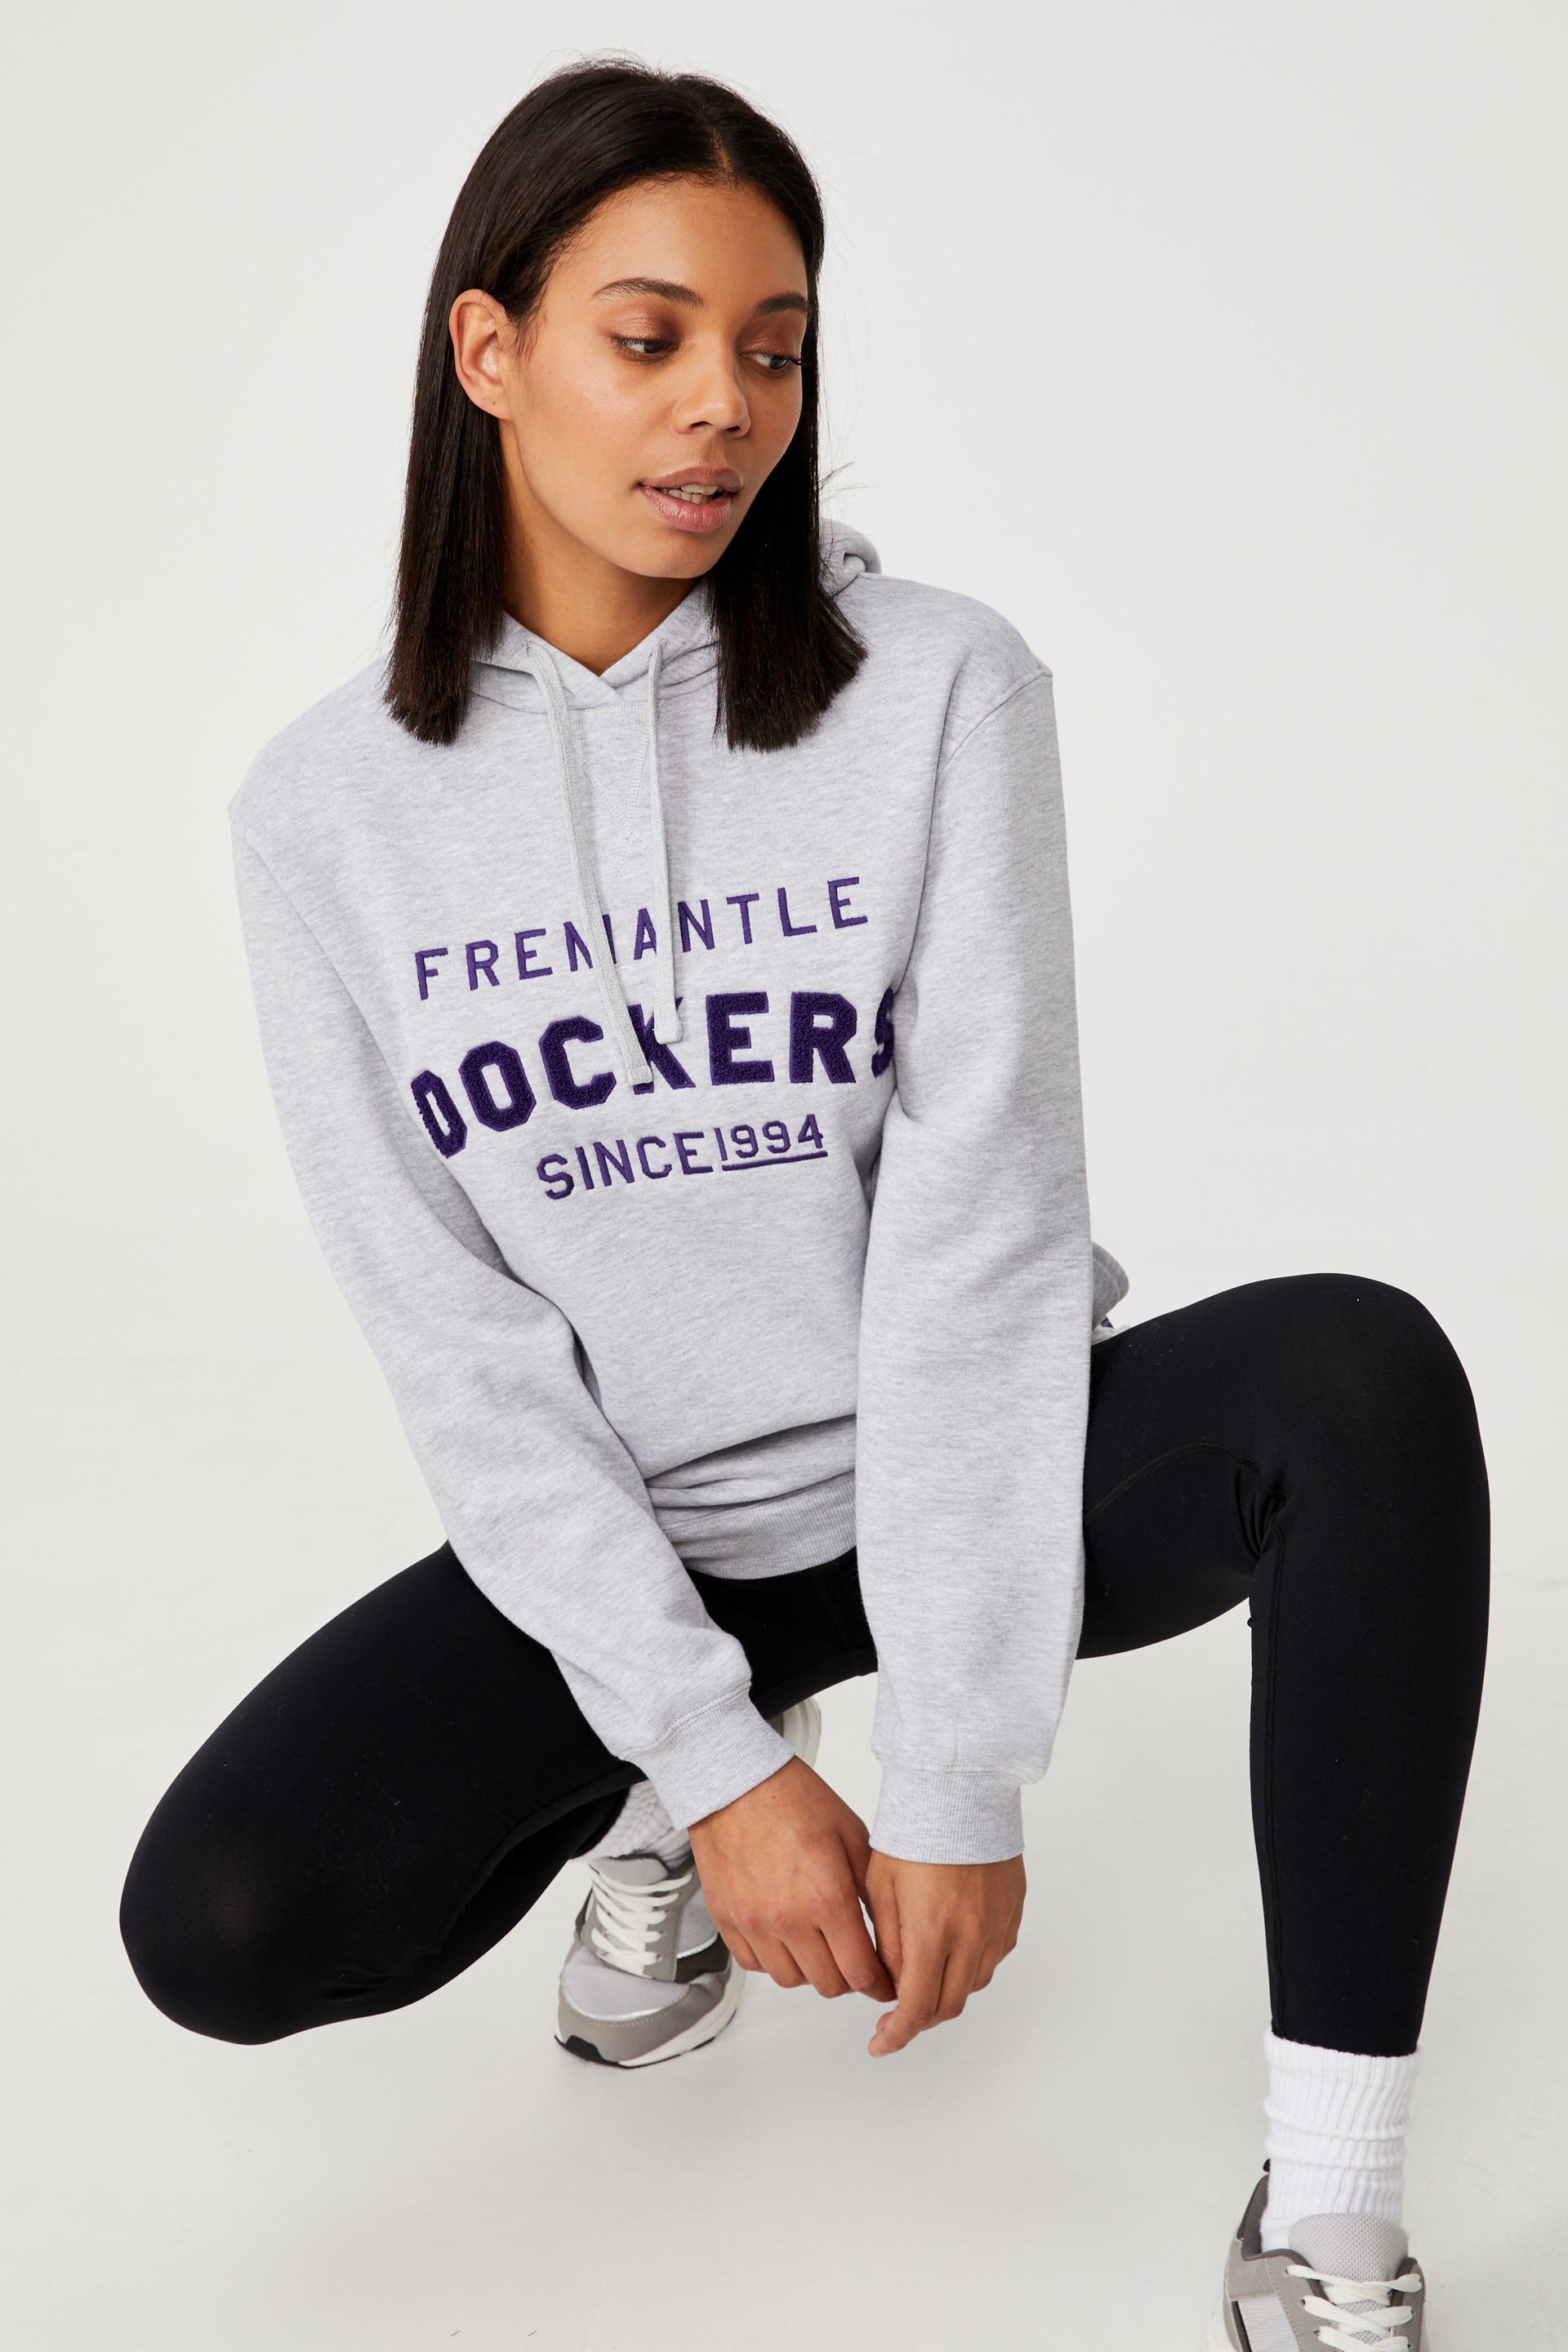 AFL - Afl Womens Embroidered Chenille Hoodie - Fremantle